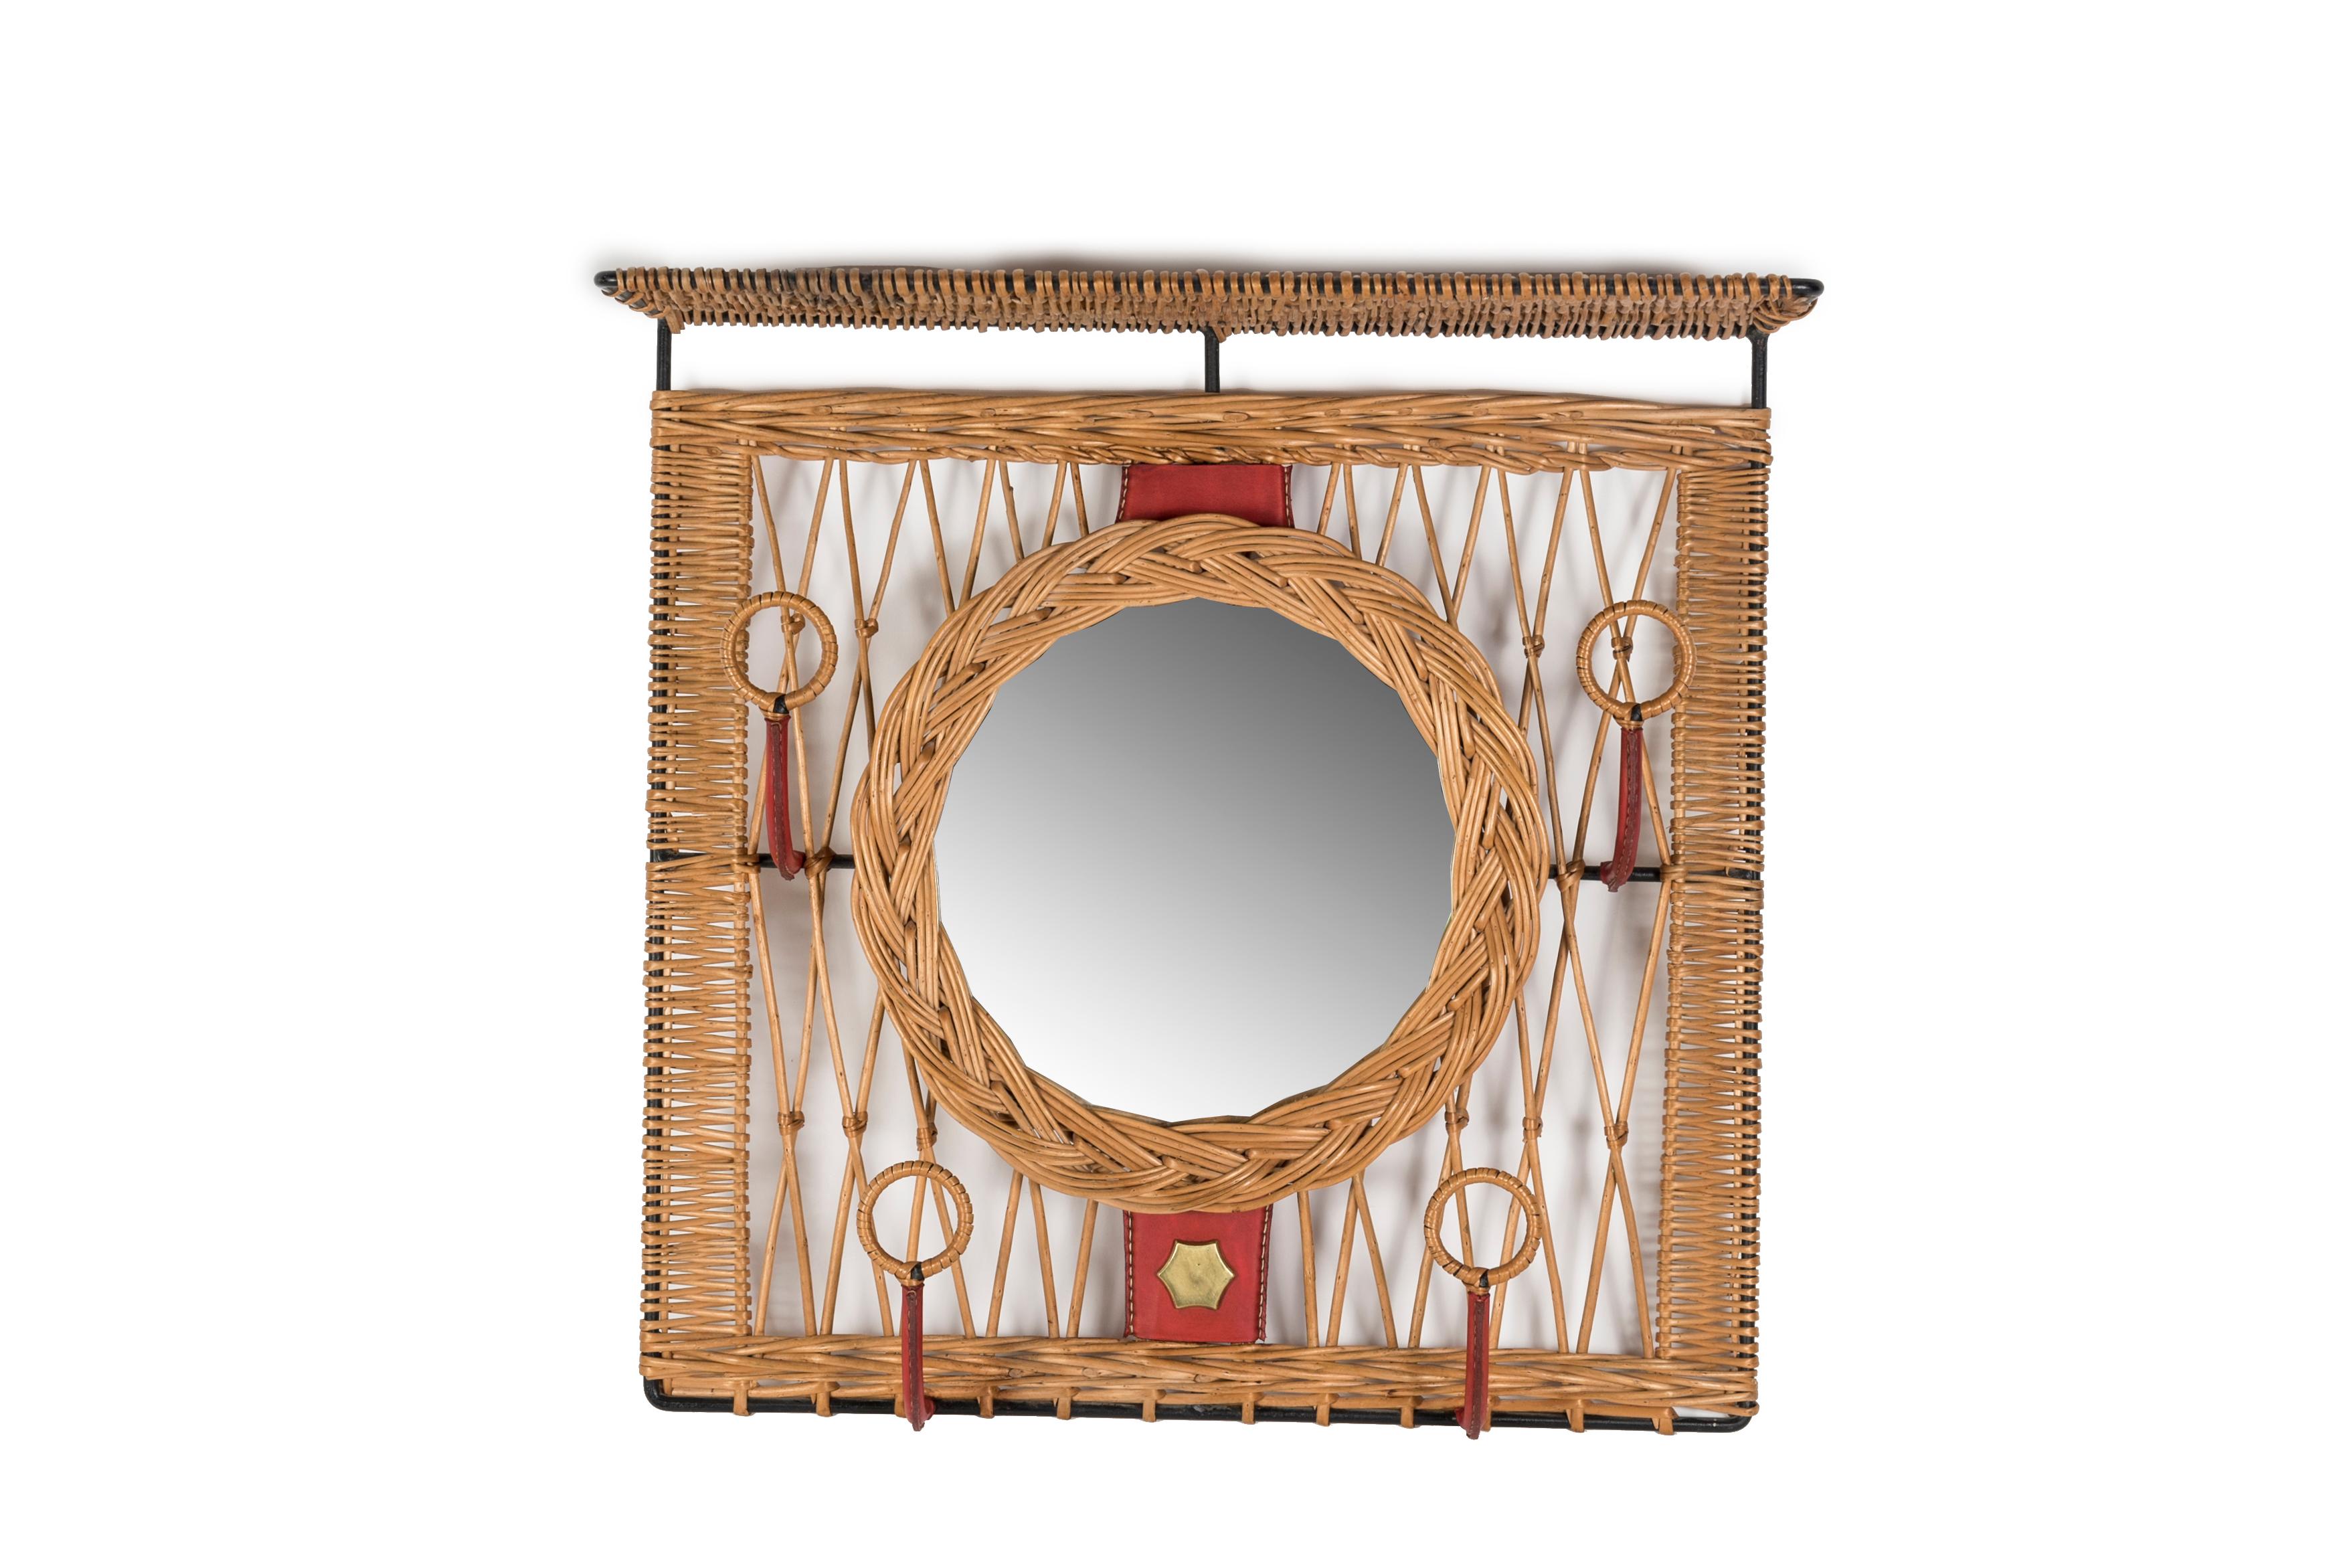 1950's rattan and stitched leather wall mirror and coat rack by Jacques Adnet